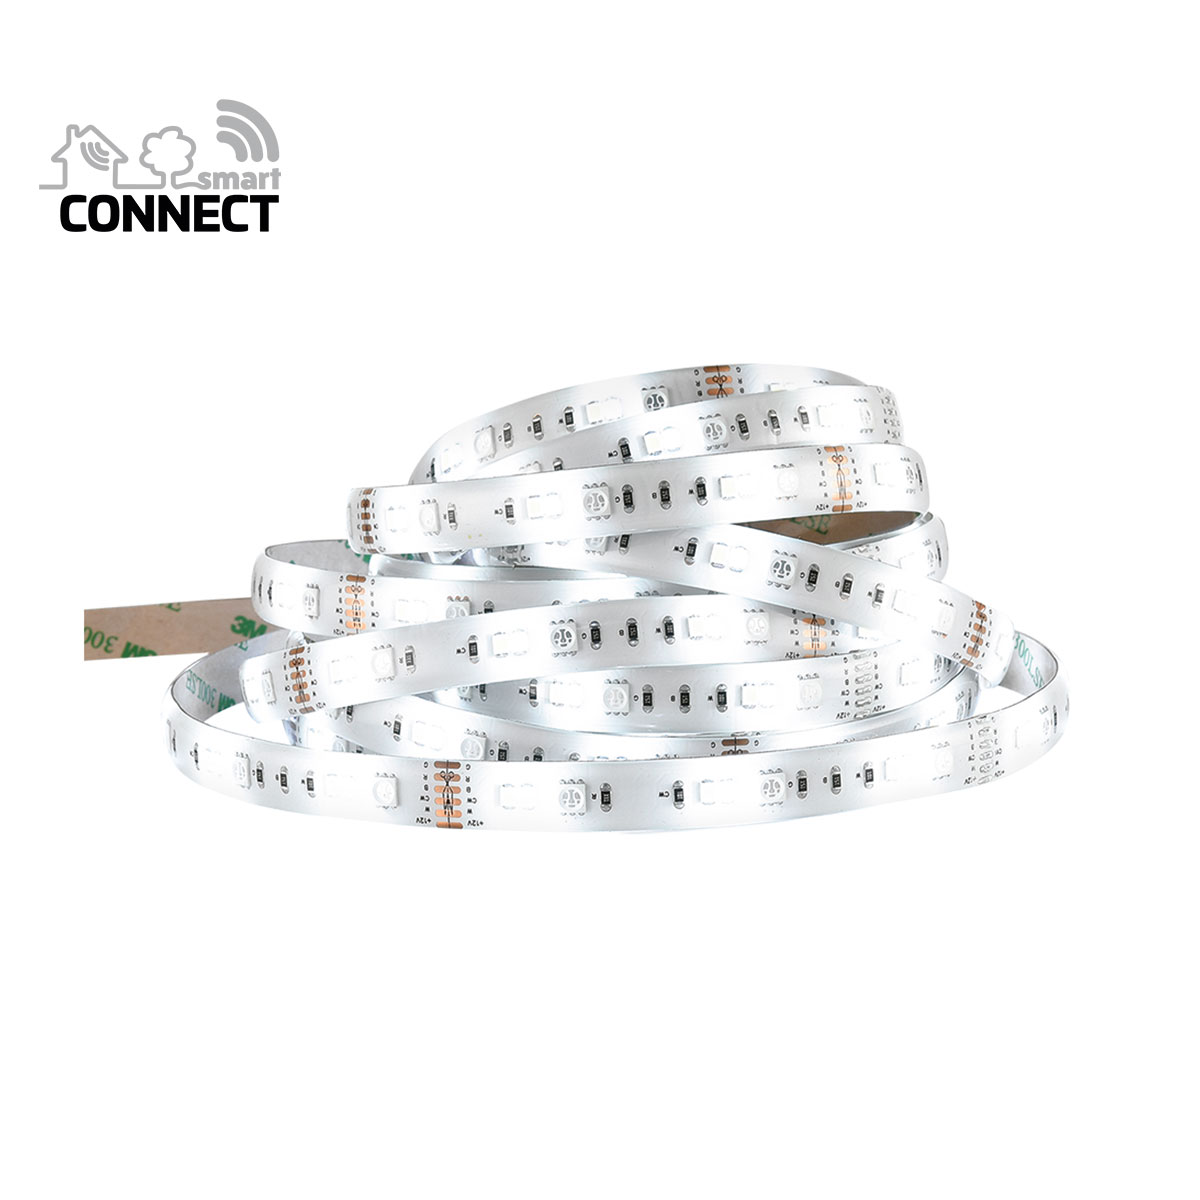 Flector weiß 5m LED-Lichtband | Smart 270381 Connect